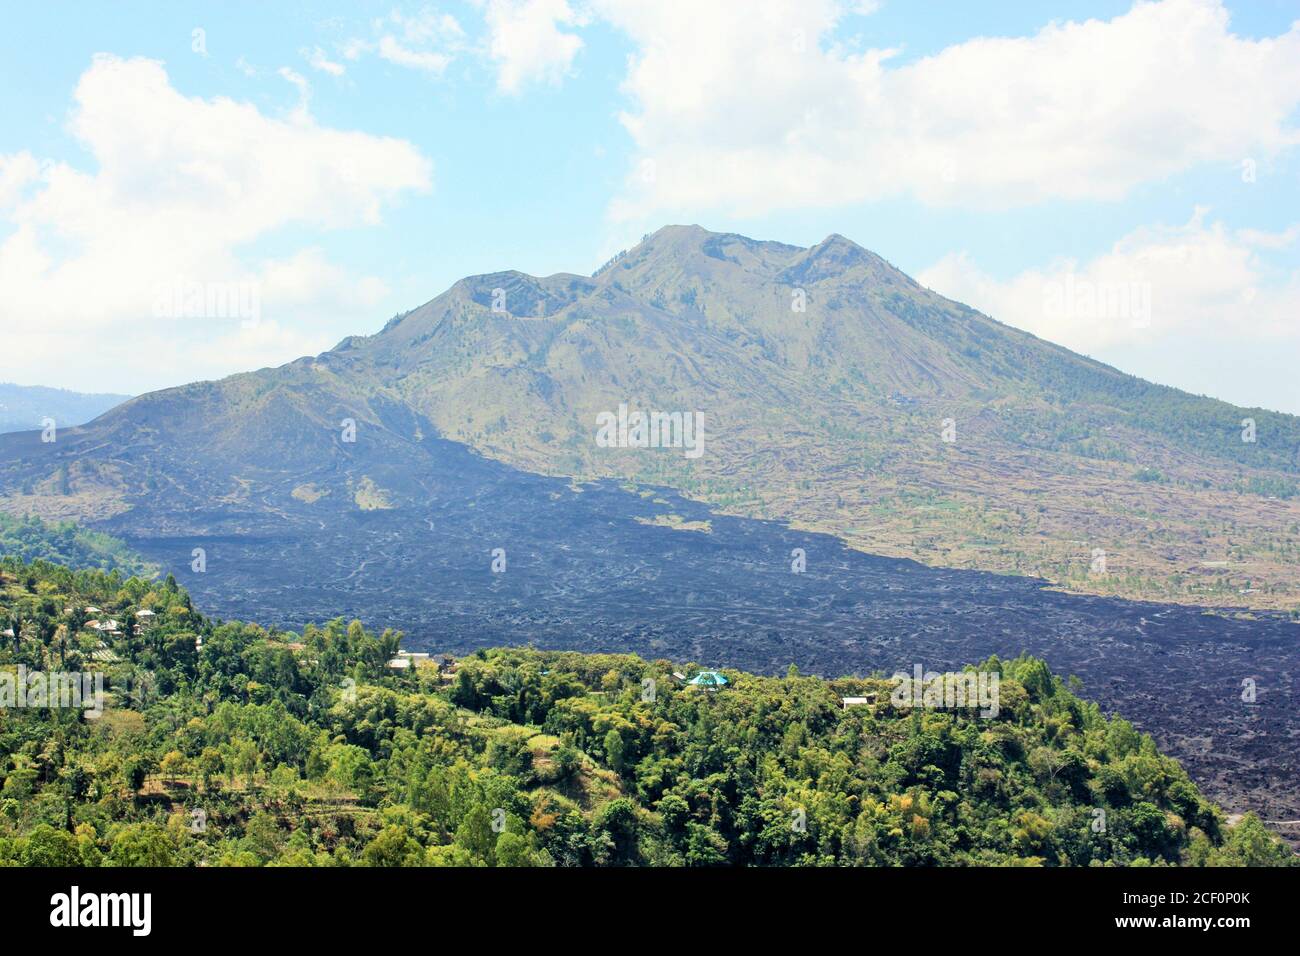 Mount Batur Volcano, with black volcanic rock and green plants in foreground in Bali, Indonesia Stock Photo